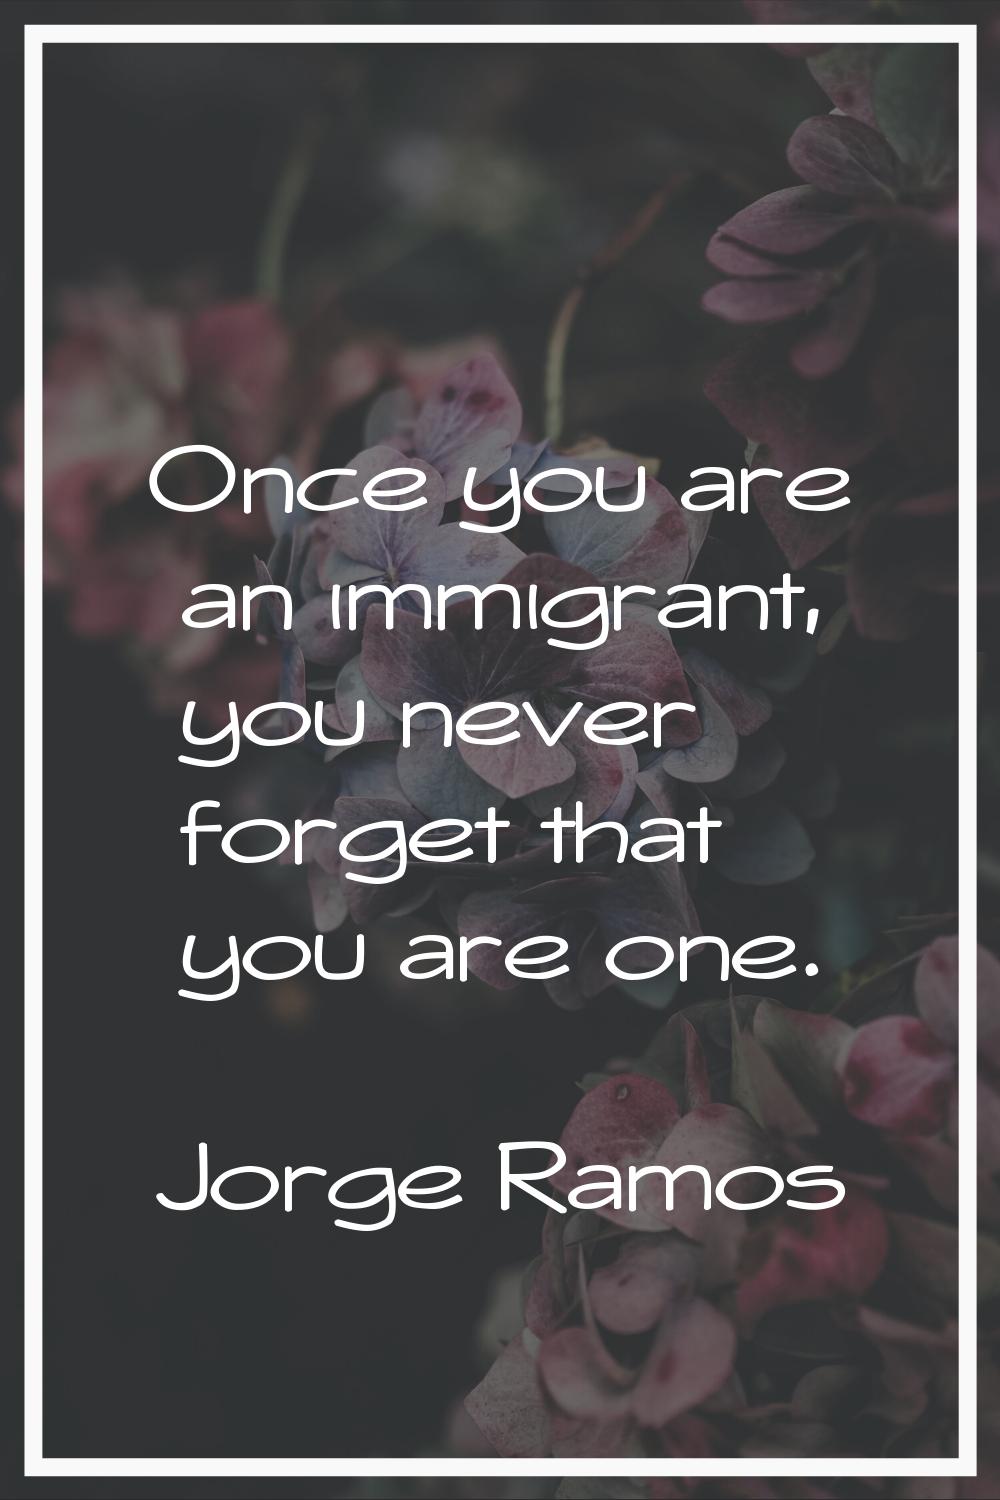 Once you are an immigrant, you never forget that you are one.